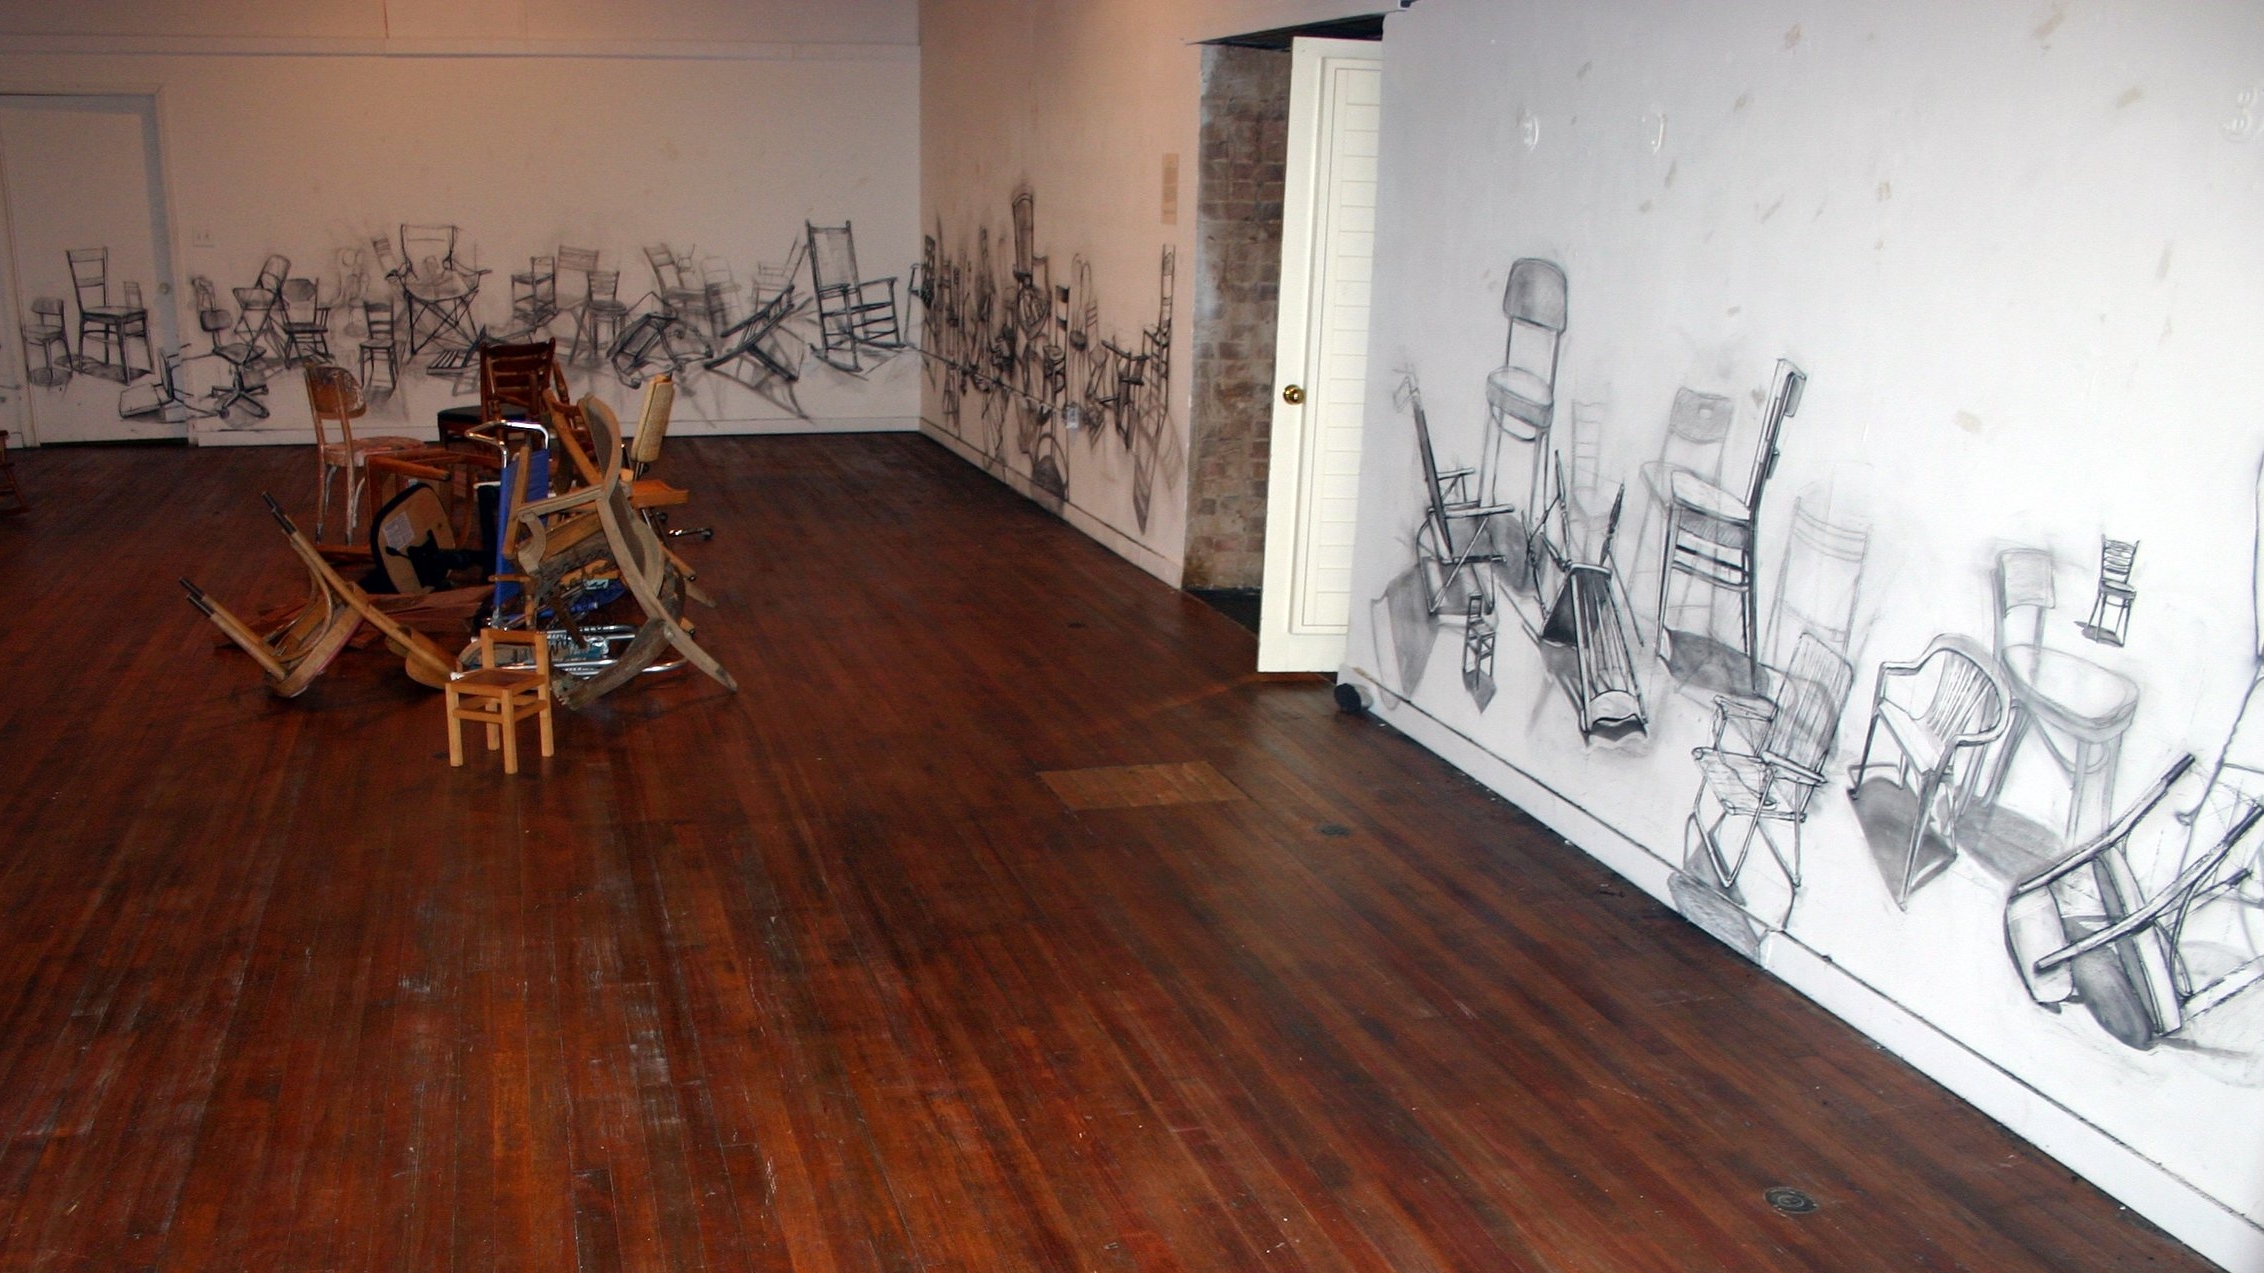 Still, 60+ft, charcoal on wall, Emerge Gallery, Greenville, NC